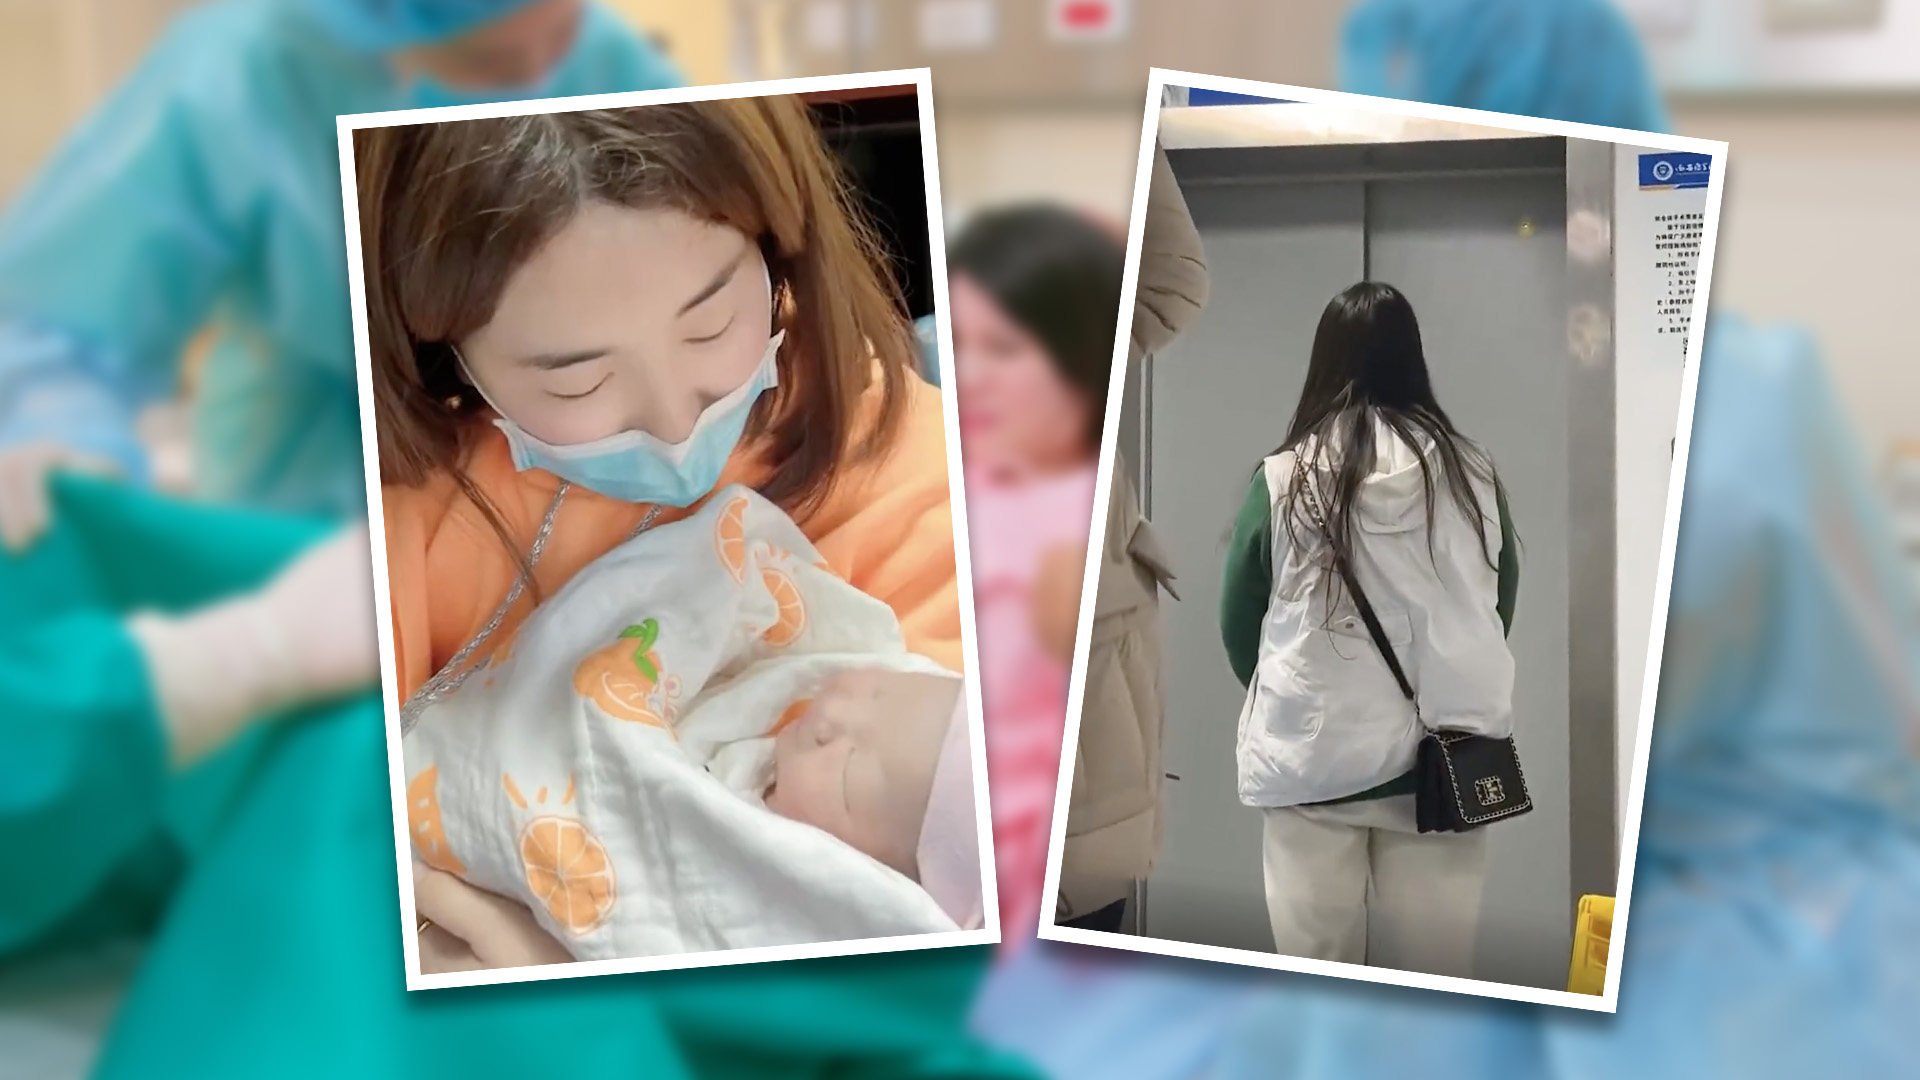 “Everybody else was waiting for the newborn child. Only she was waiting for her own child,” said one person who watched the video. Photo: SCMP composite/Weibo